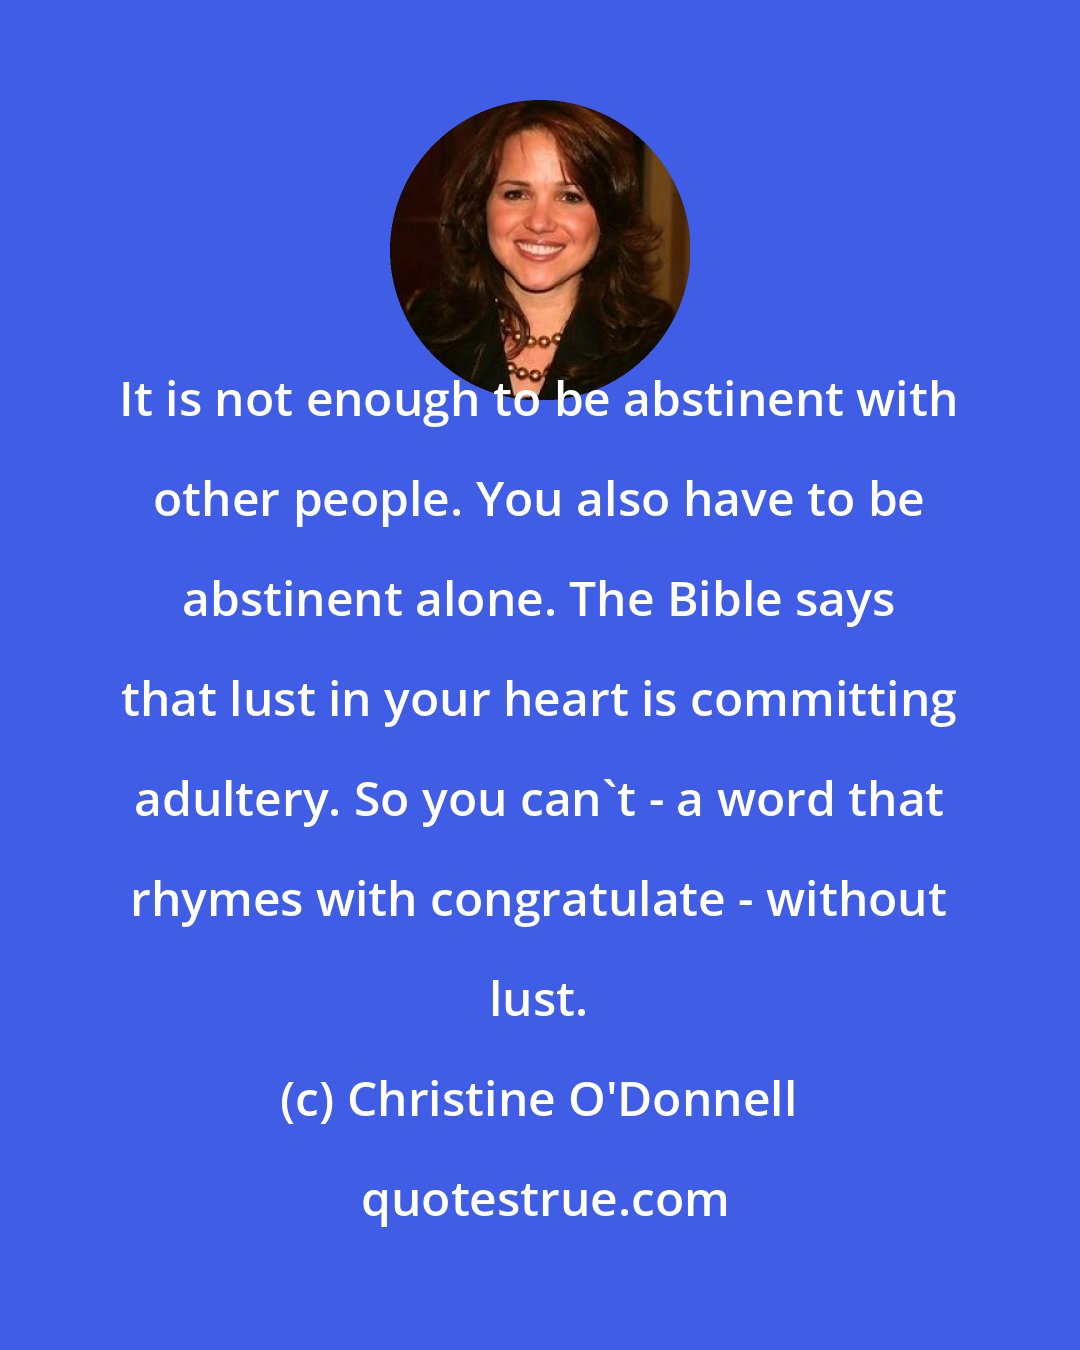 Christine O'Donnell: It is not enough to be abstinent with other people. You also have to be abstinent alone. The Bible says that lust in your heart is committing adultery. So you can't - a word that rhymes with congratulate - without lust.